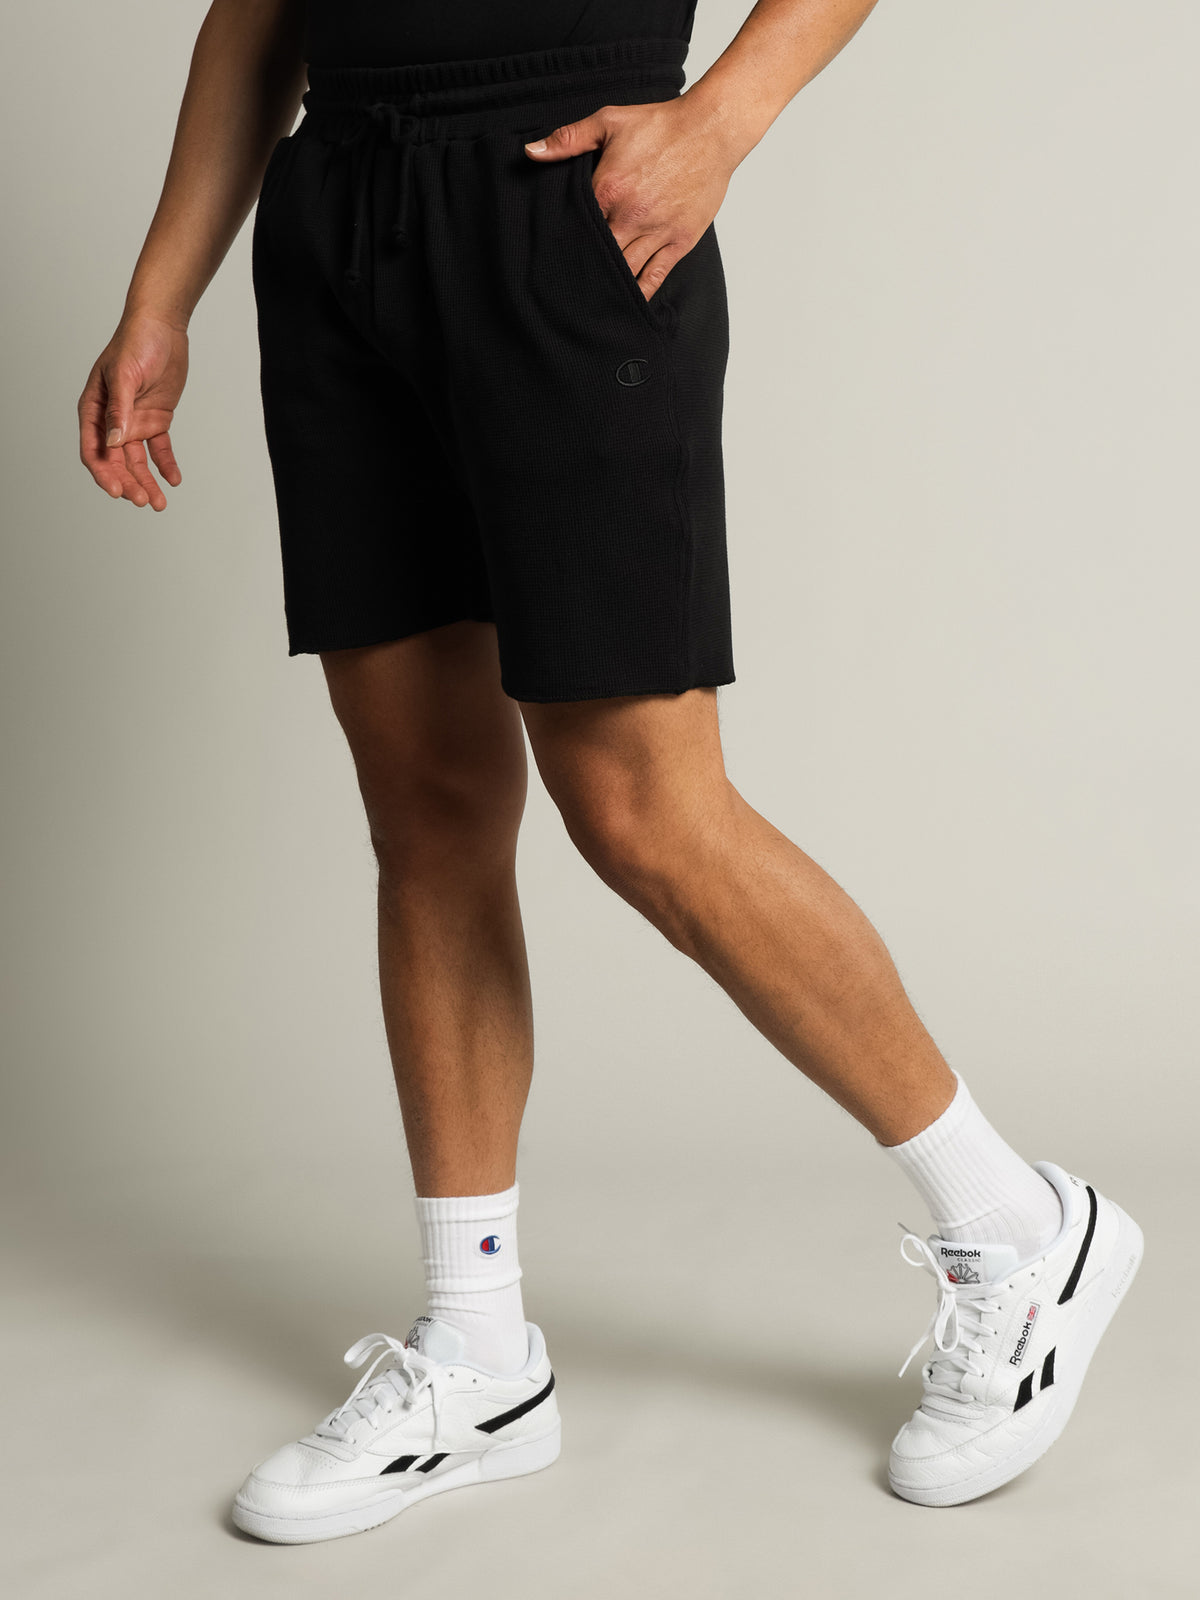 Re:bound Waffle Shorts in Black